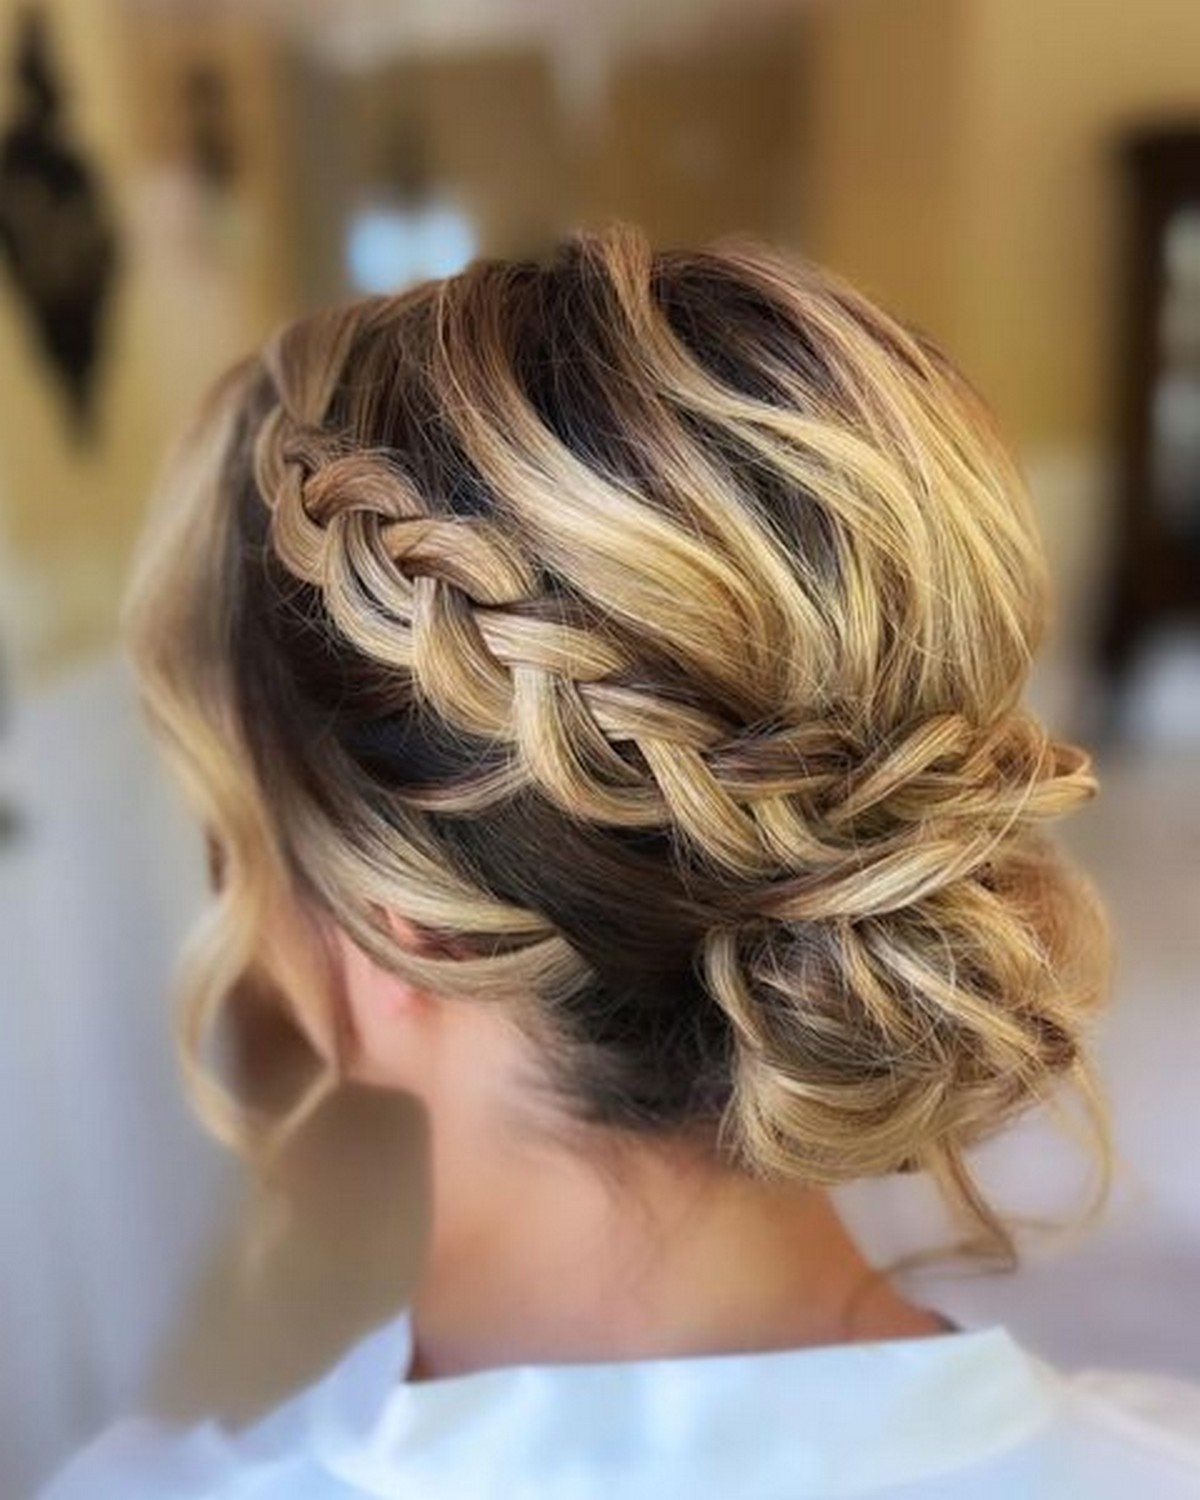 Highlight Low Updo Bun With A Side Braid